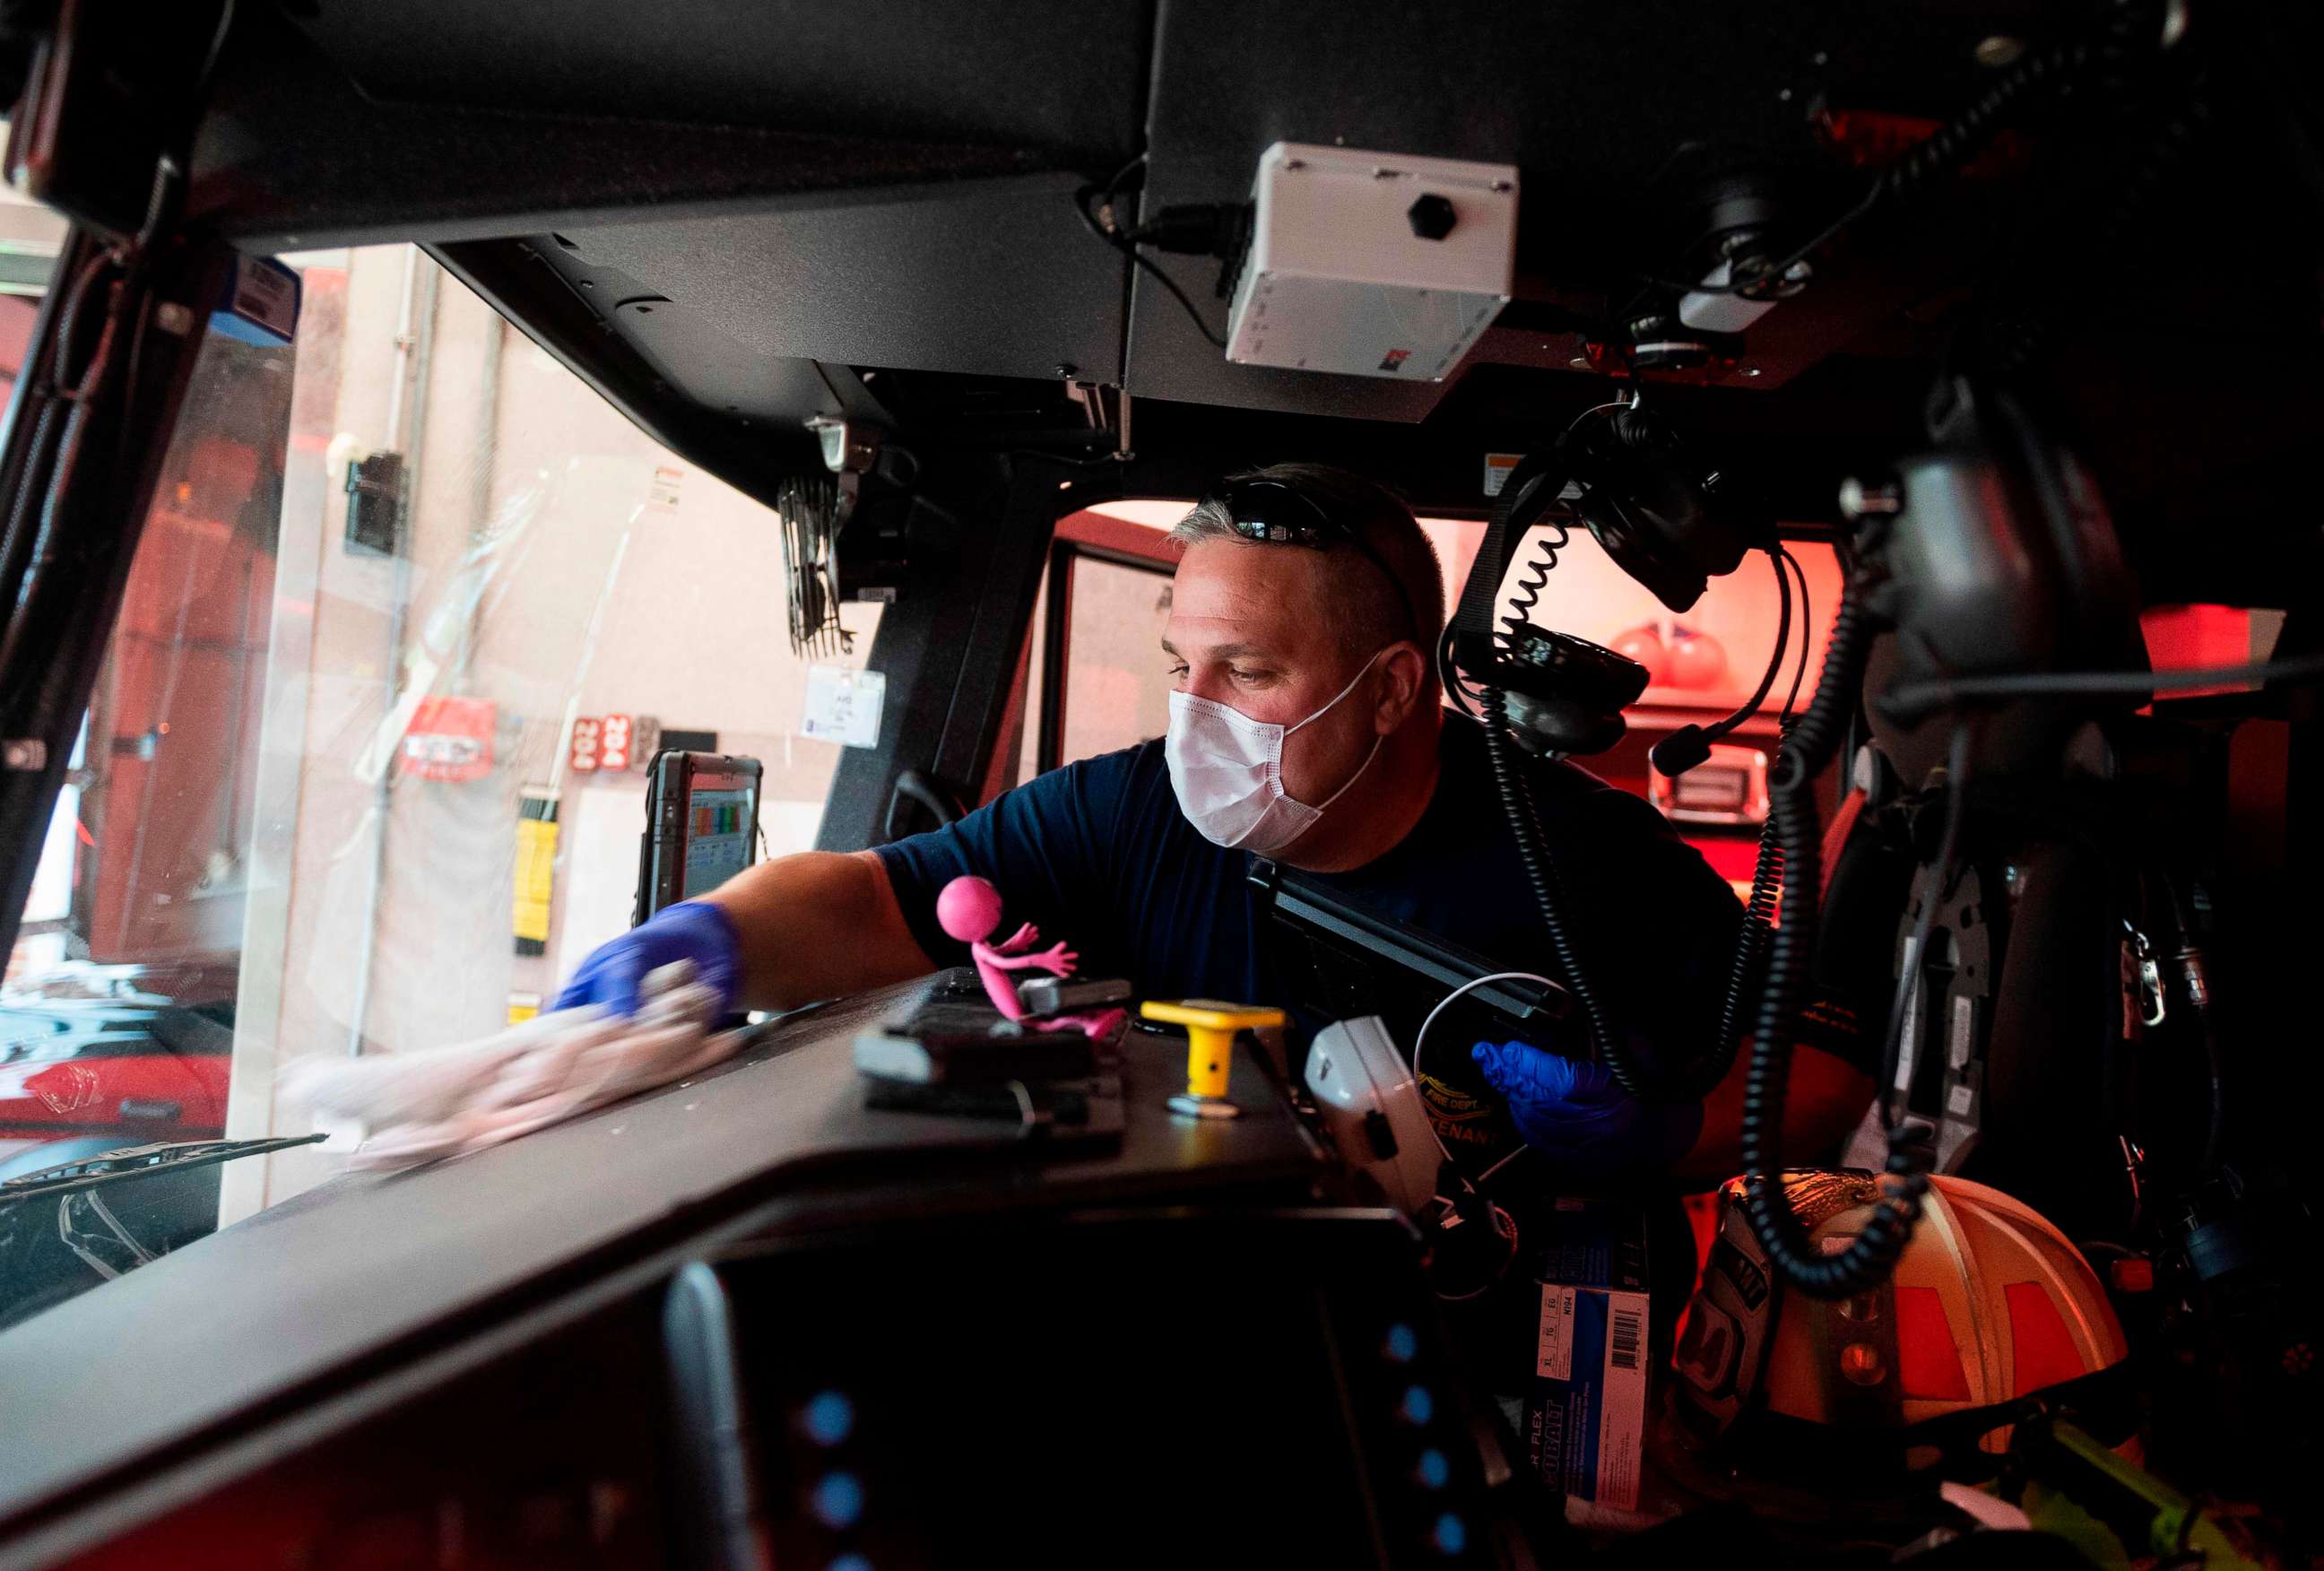 PHOTO: Lieutenant Gordon Wills cleans the fire engine with a bleach solution during the implementation of new safety measures to protect against the coronavirus, COVID-19, at Alexandria Fire Station 204 in Virginia, April 8, 2020.